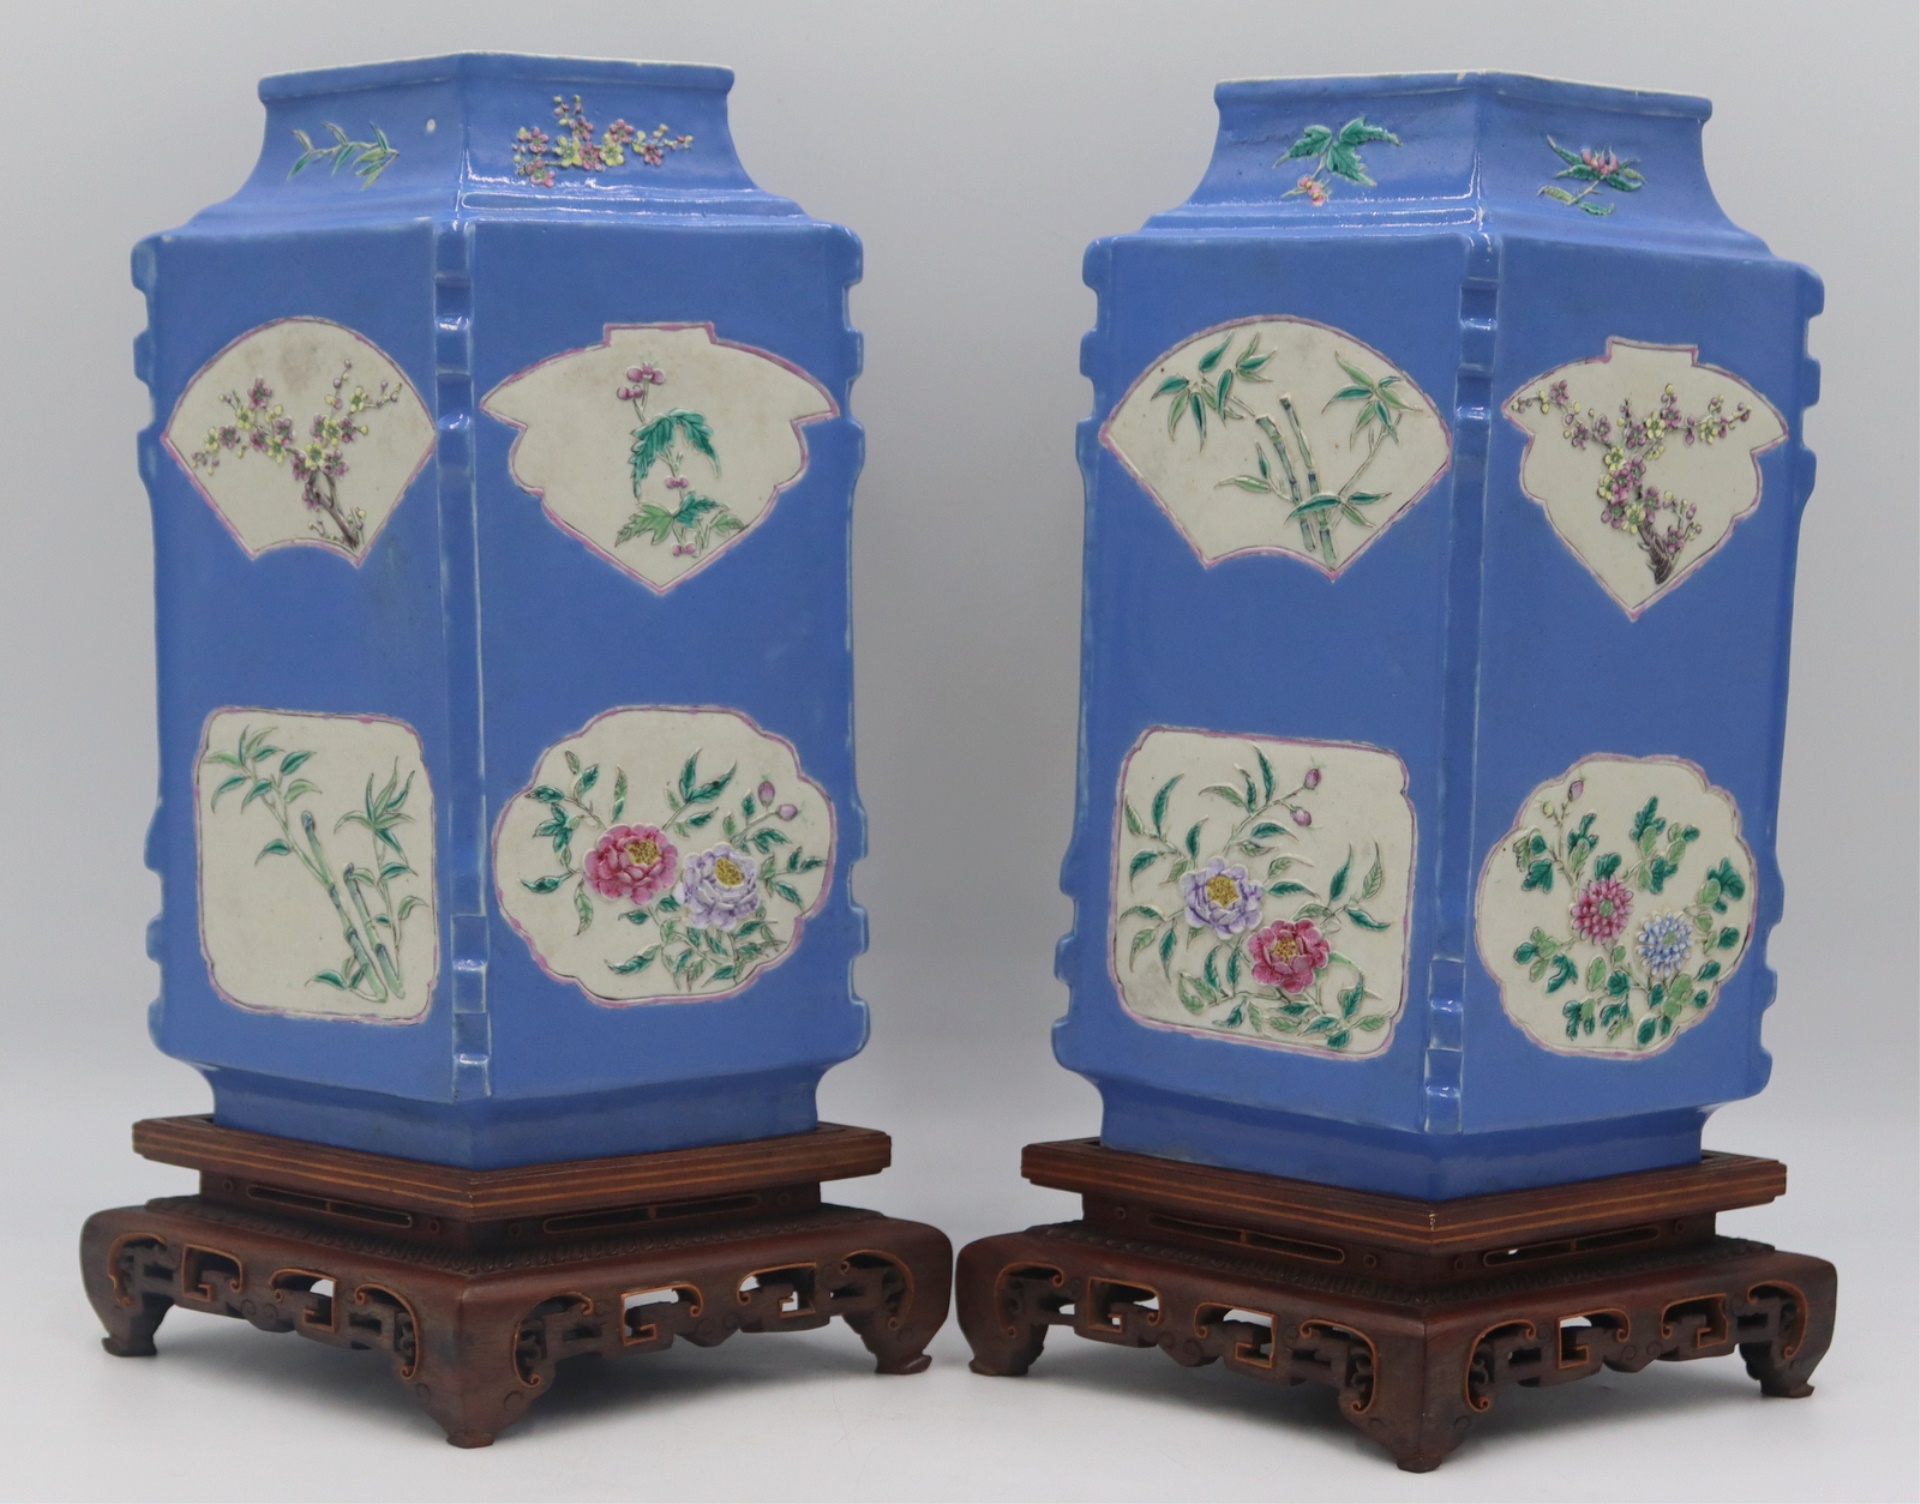 PAIR OF CHINESE FLORAL DECORATED